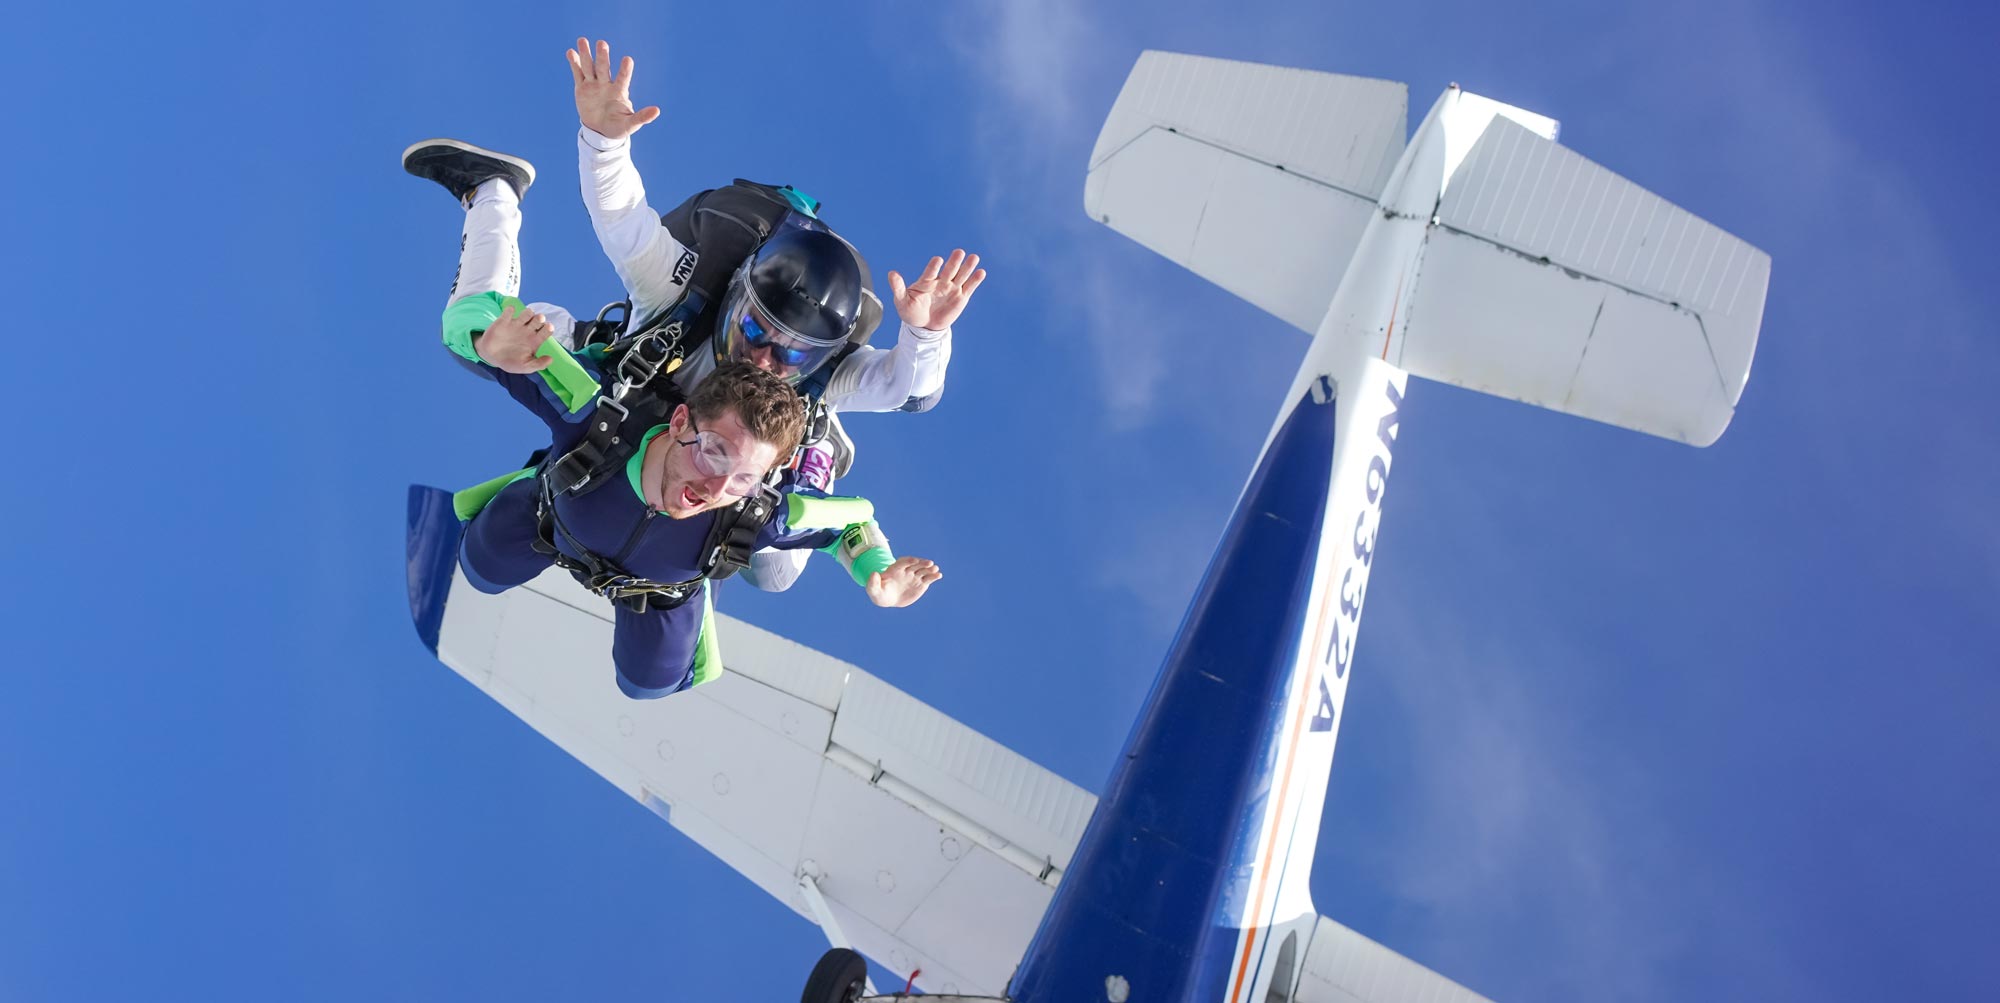 Courage to skydive